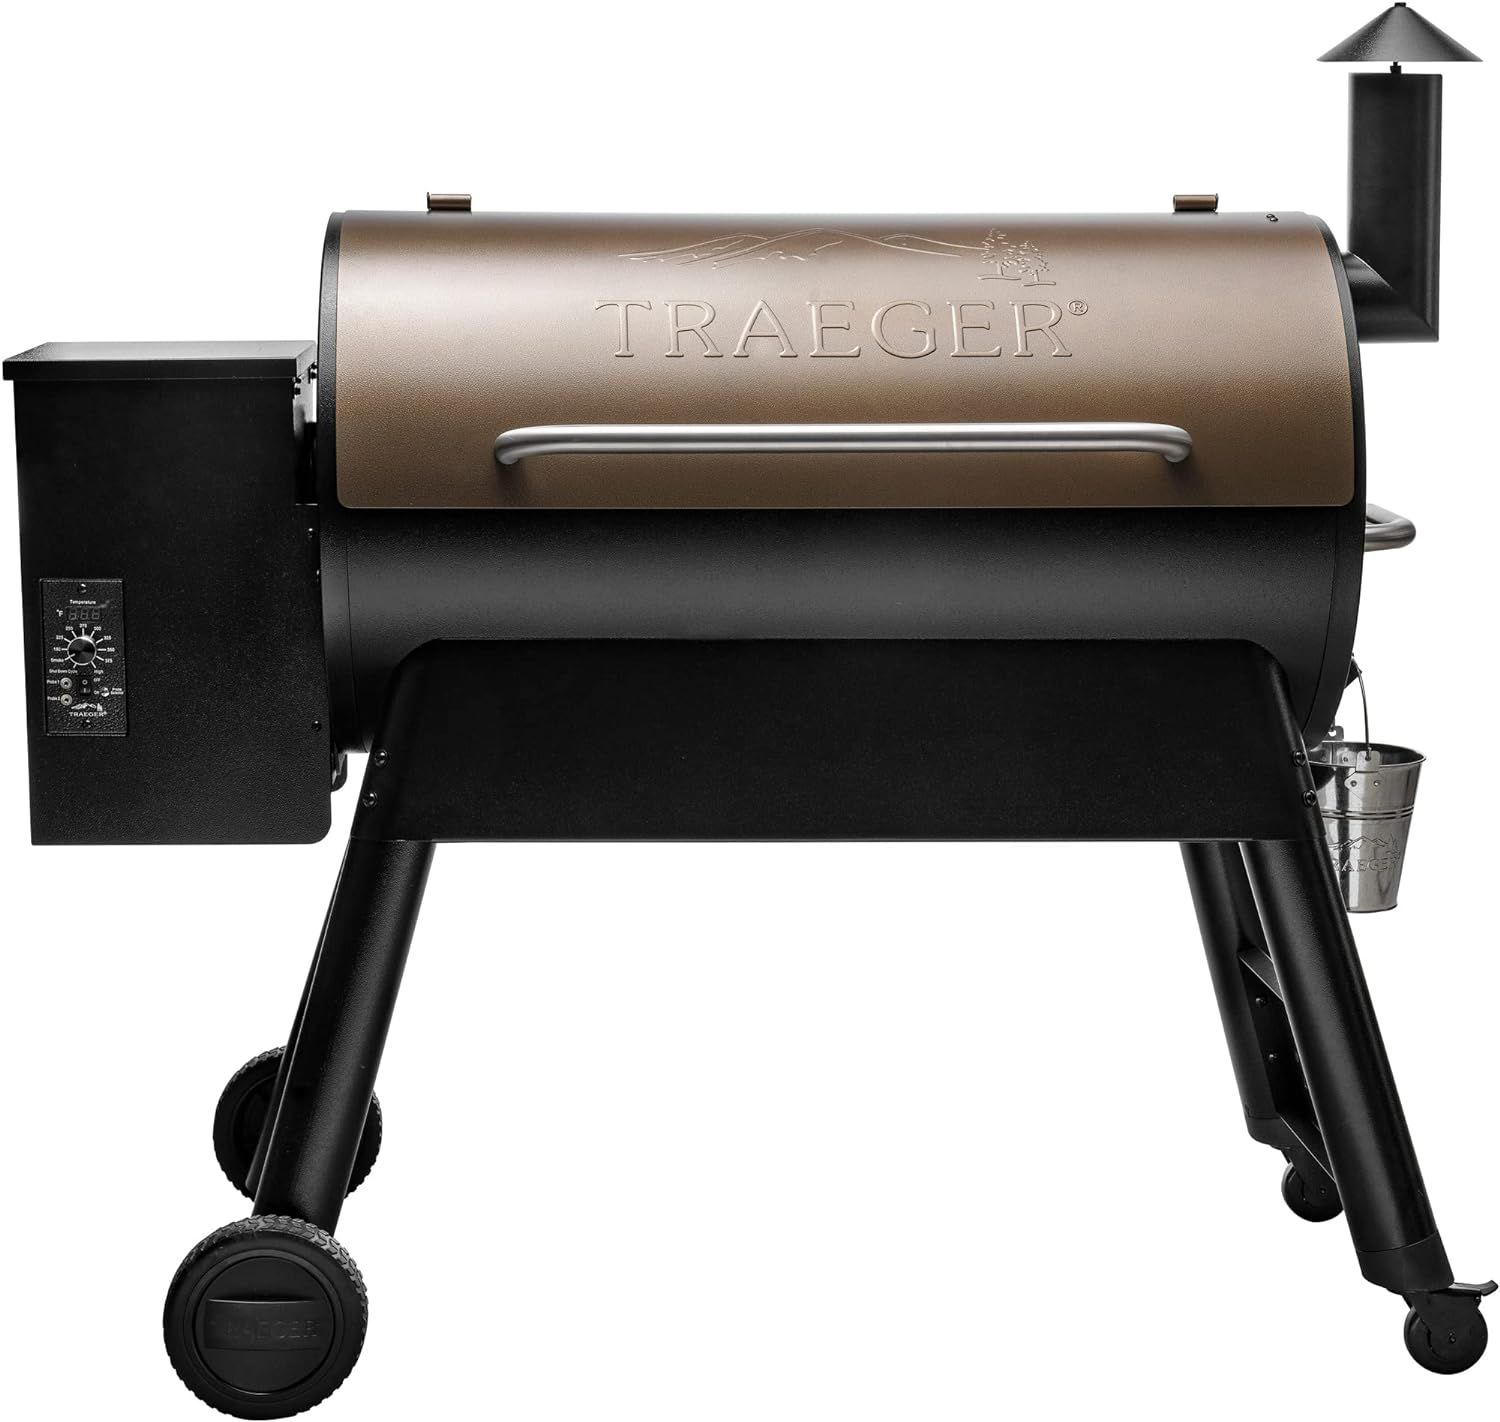 Traeger Grills Pro 34 Electric Wood Pellet Grill and Smoker, Bronze | Amazon (US)